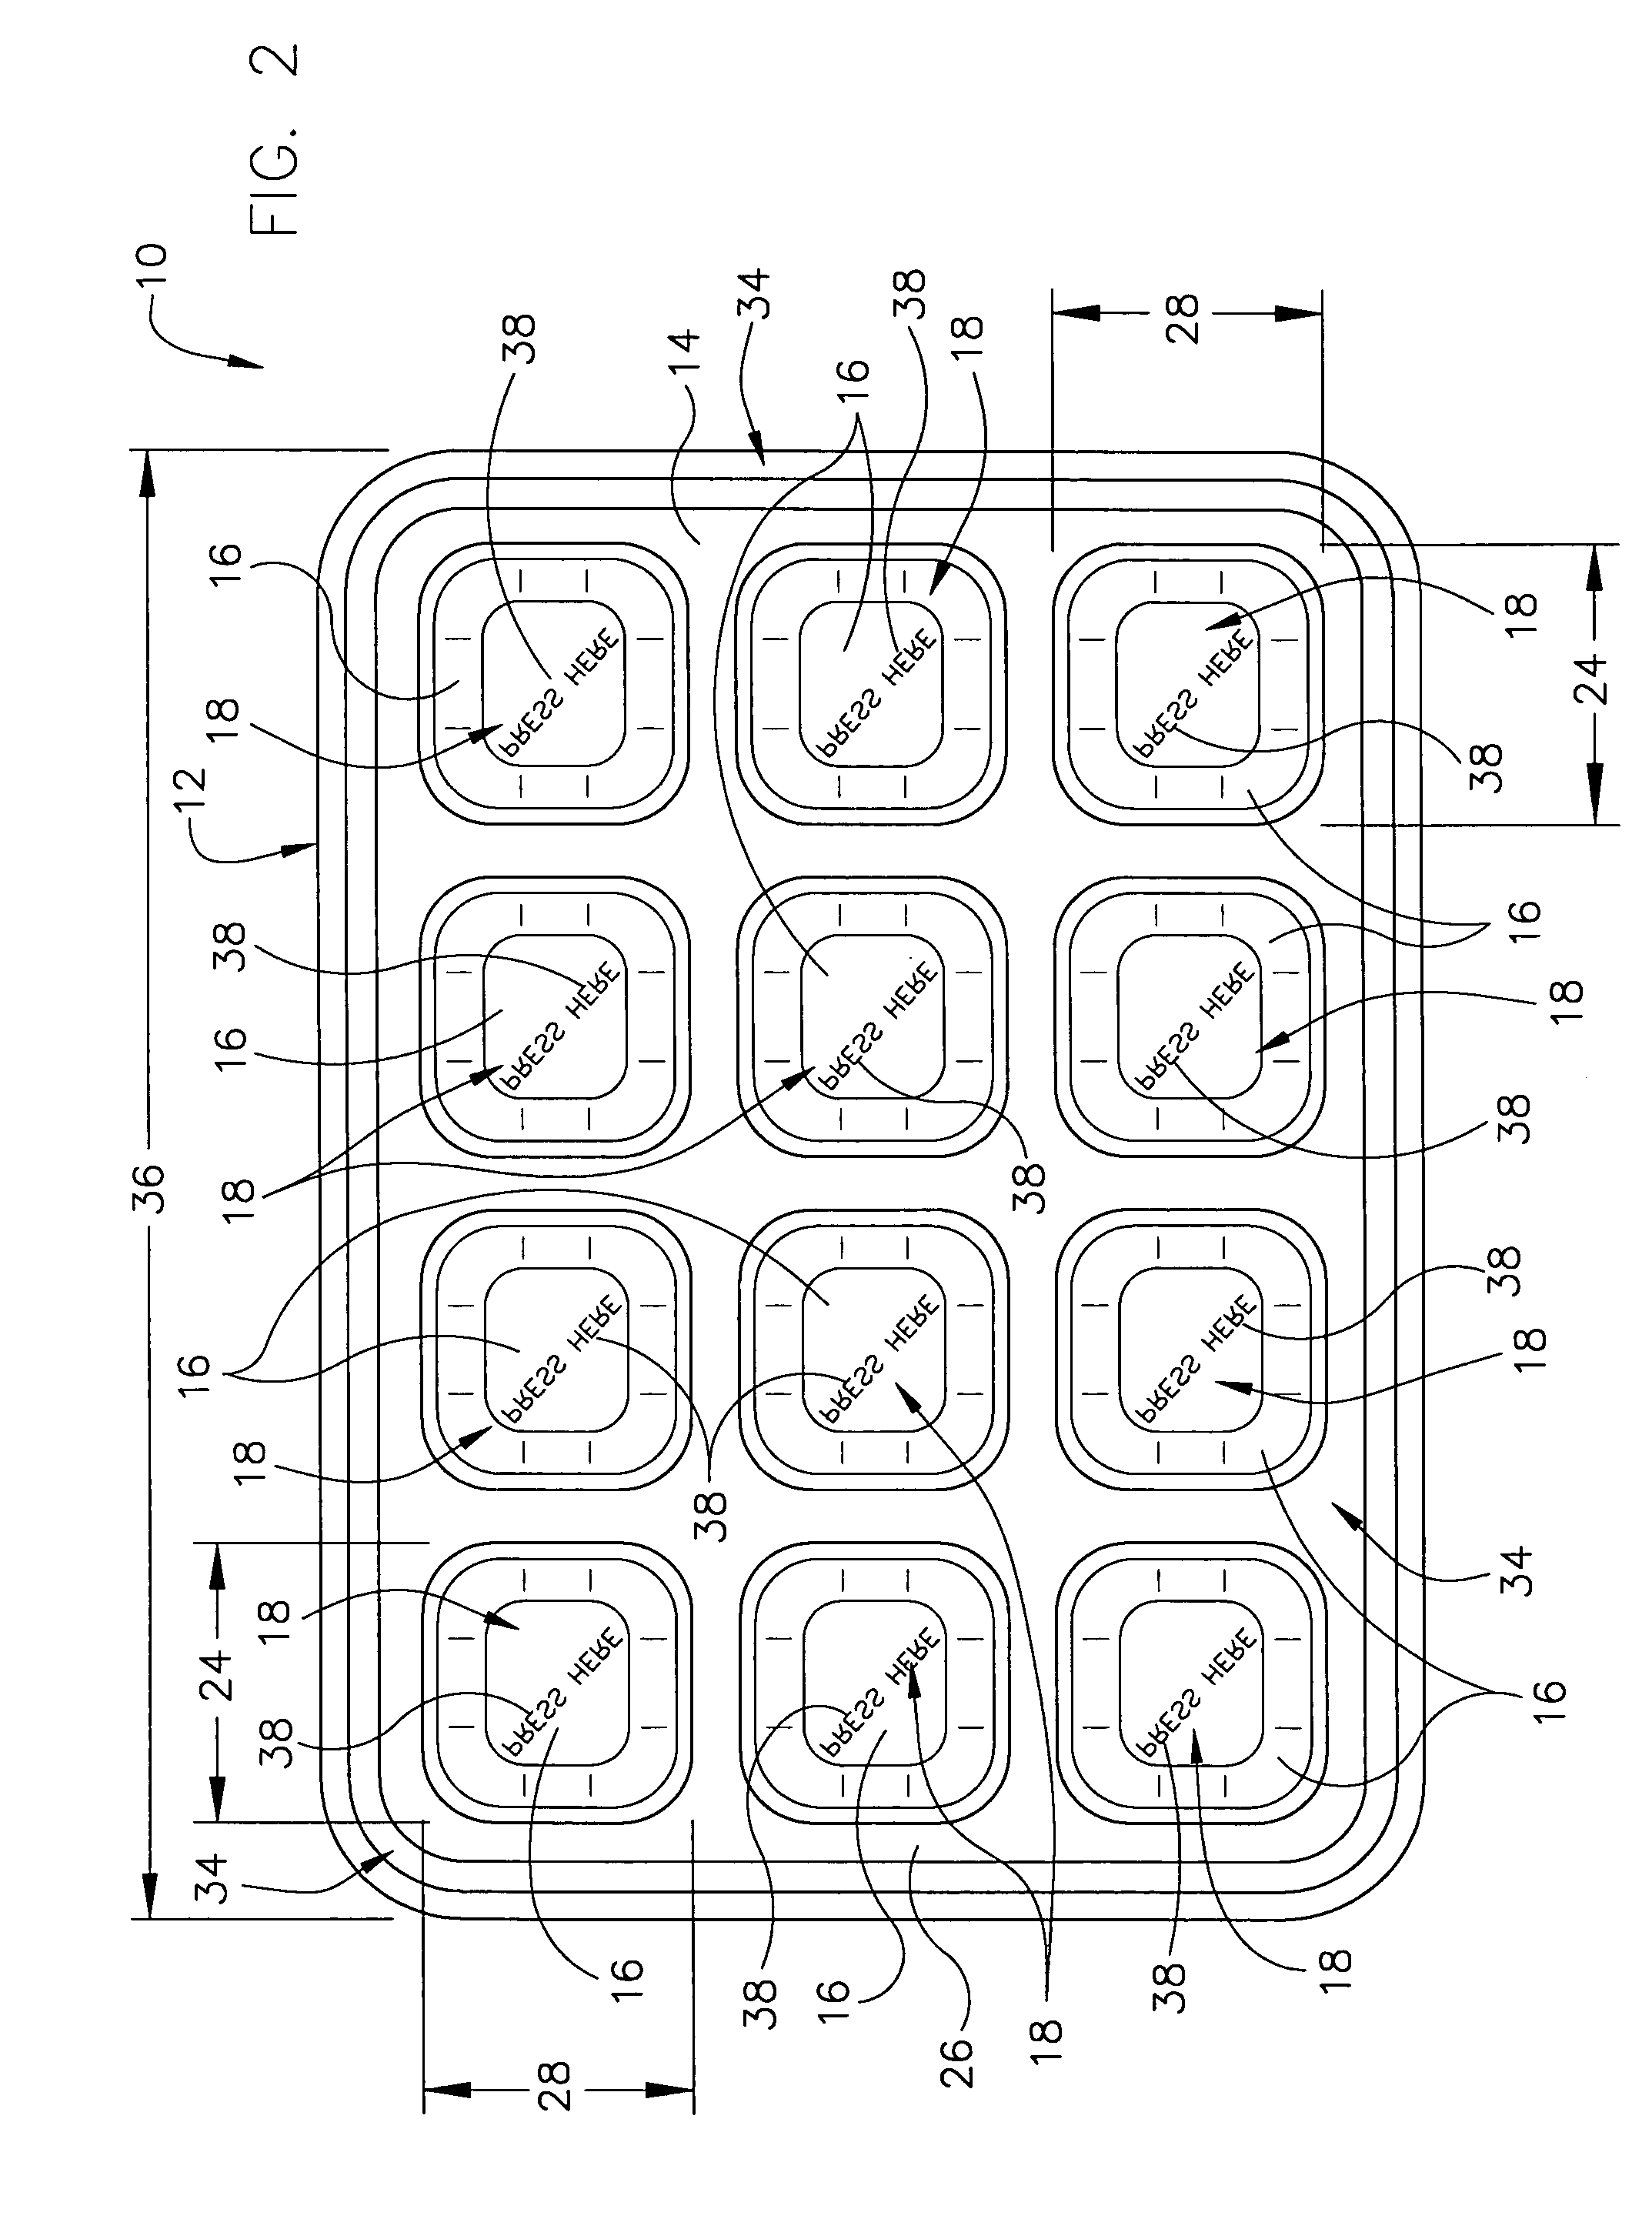 Methods and apparatus for processing food